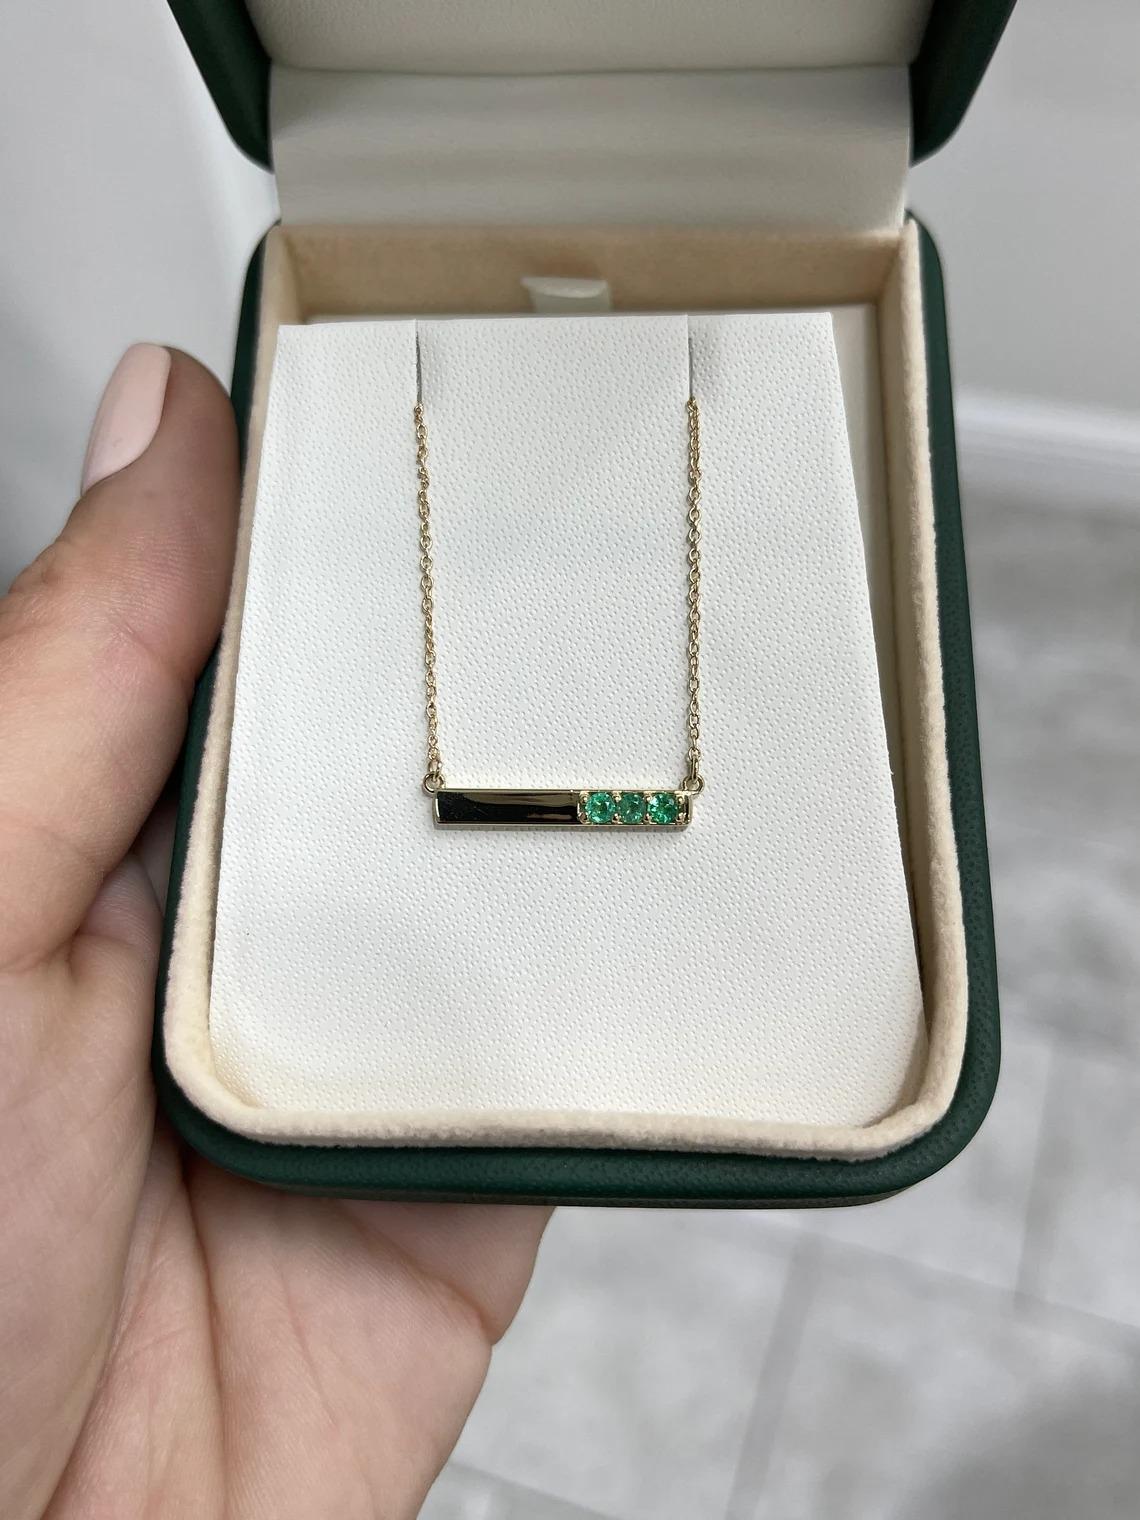 A gorgeous emerald necklace, that features three dainty natural emeralds that are from the mines of Zambia. These petite stones showcase a beautiful emerald green color, clarity, and luster. Carefully crafted and set in 14K gold, attached to a